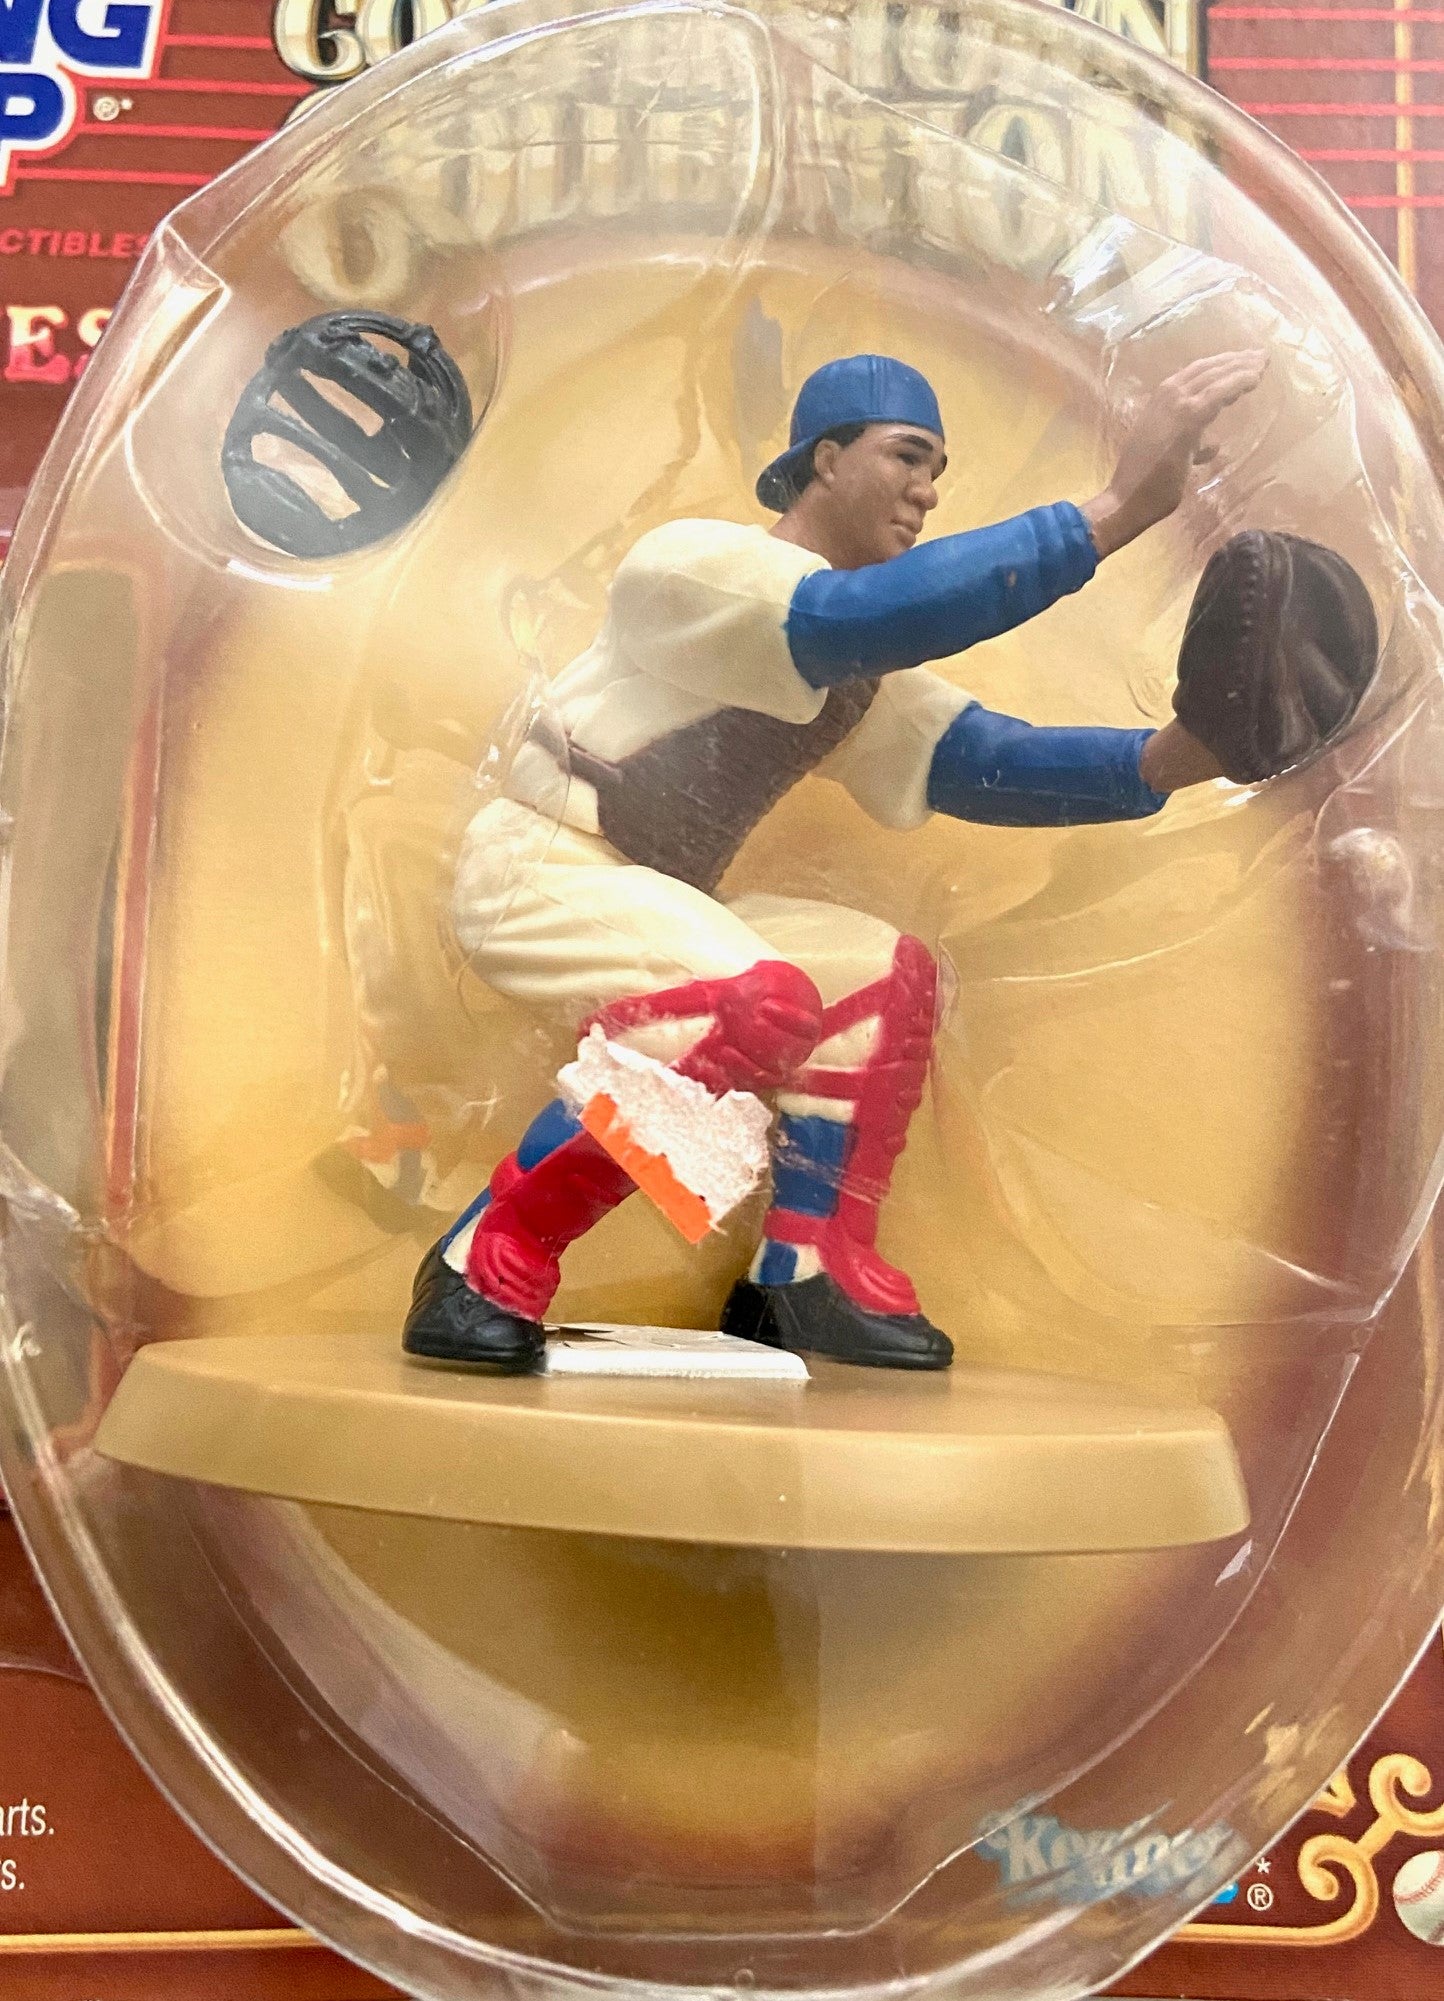 Roy Campanella 1998 Cooperstown Collection Starting Lineup MLB Figurine (New) by Kenner